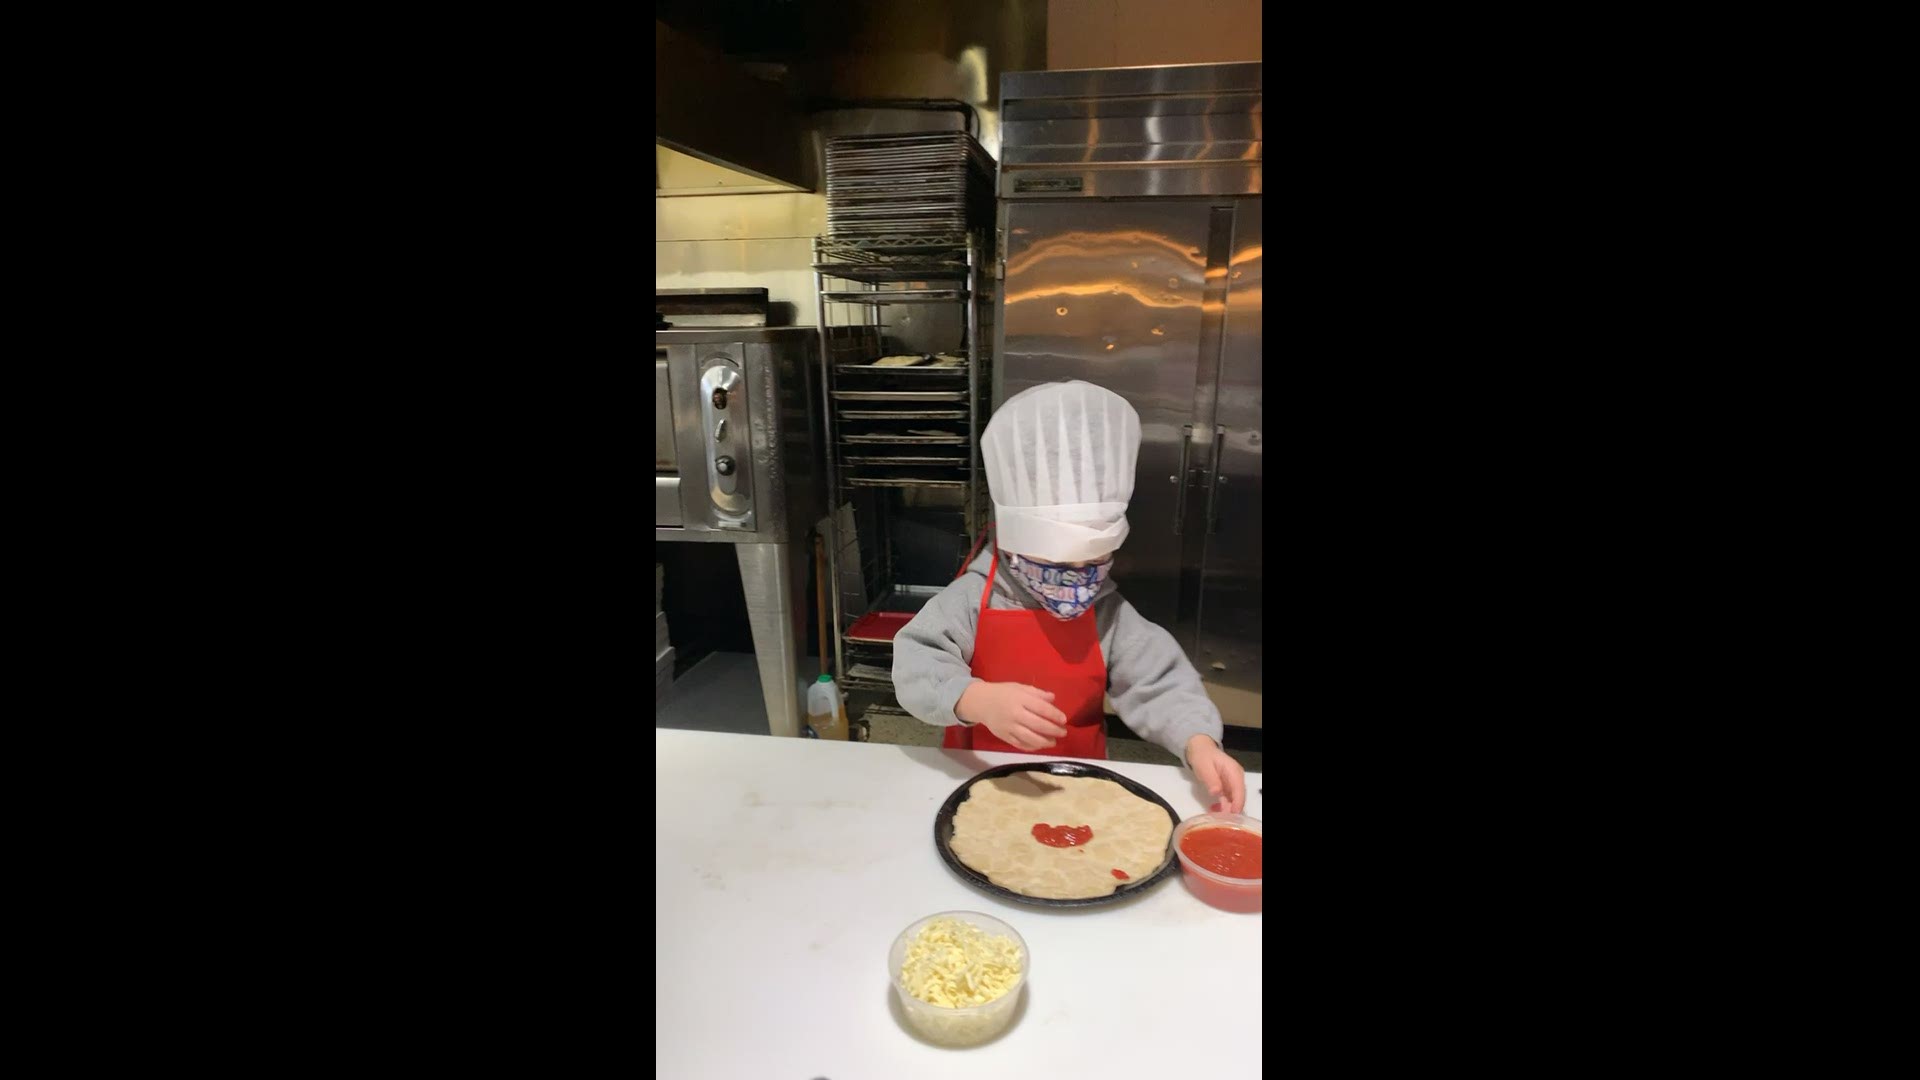 The pizzeria closed its doors for the day to teach kids battling illnesses how to make pizza!